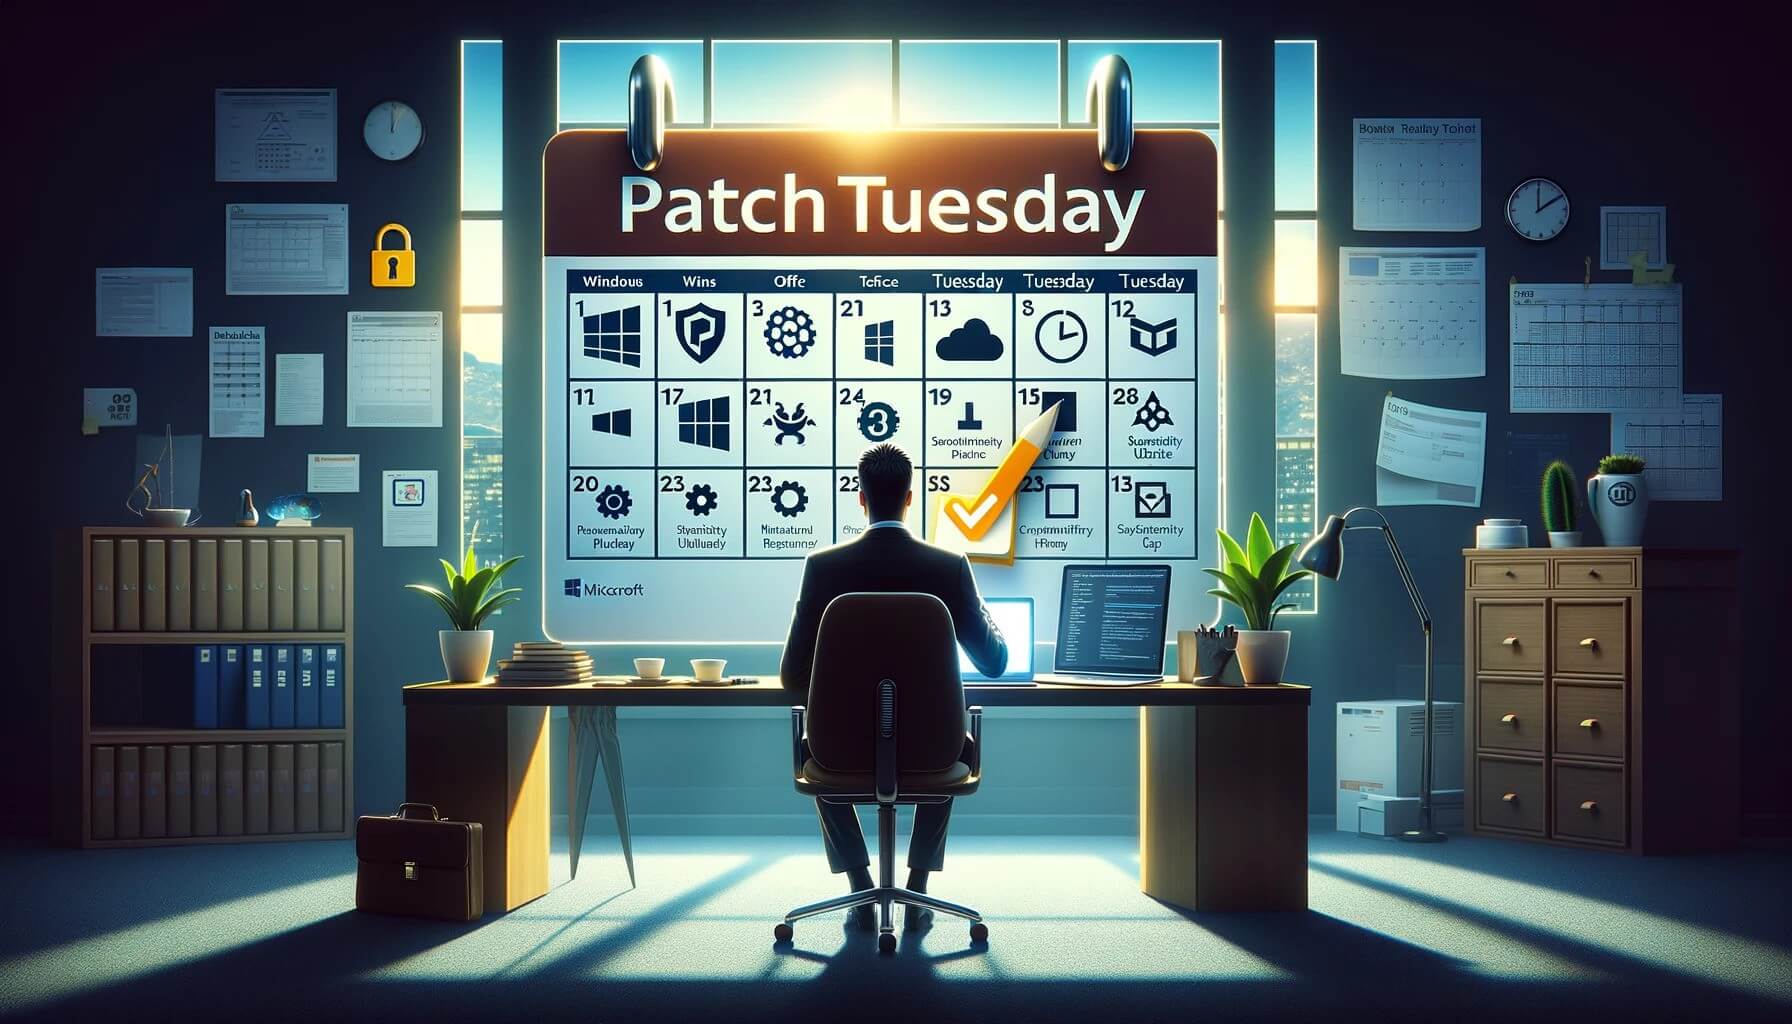 Man sitting on a desk which has a giant patch tuesday calendar on it